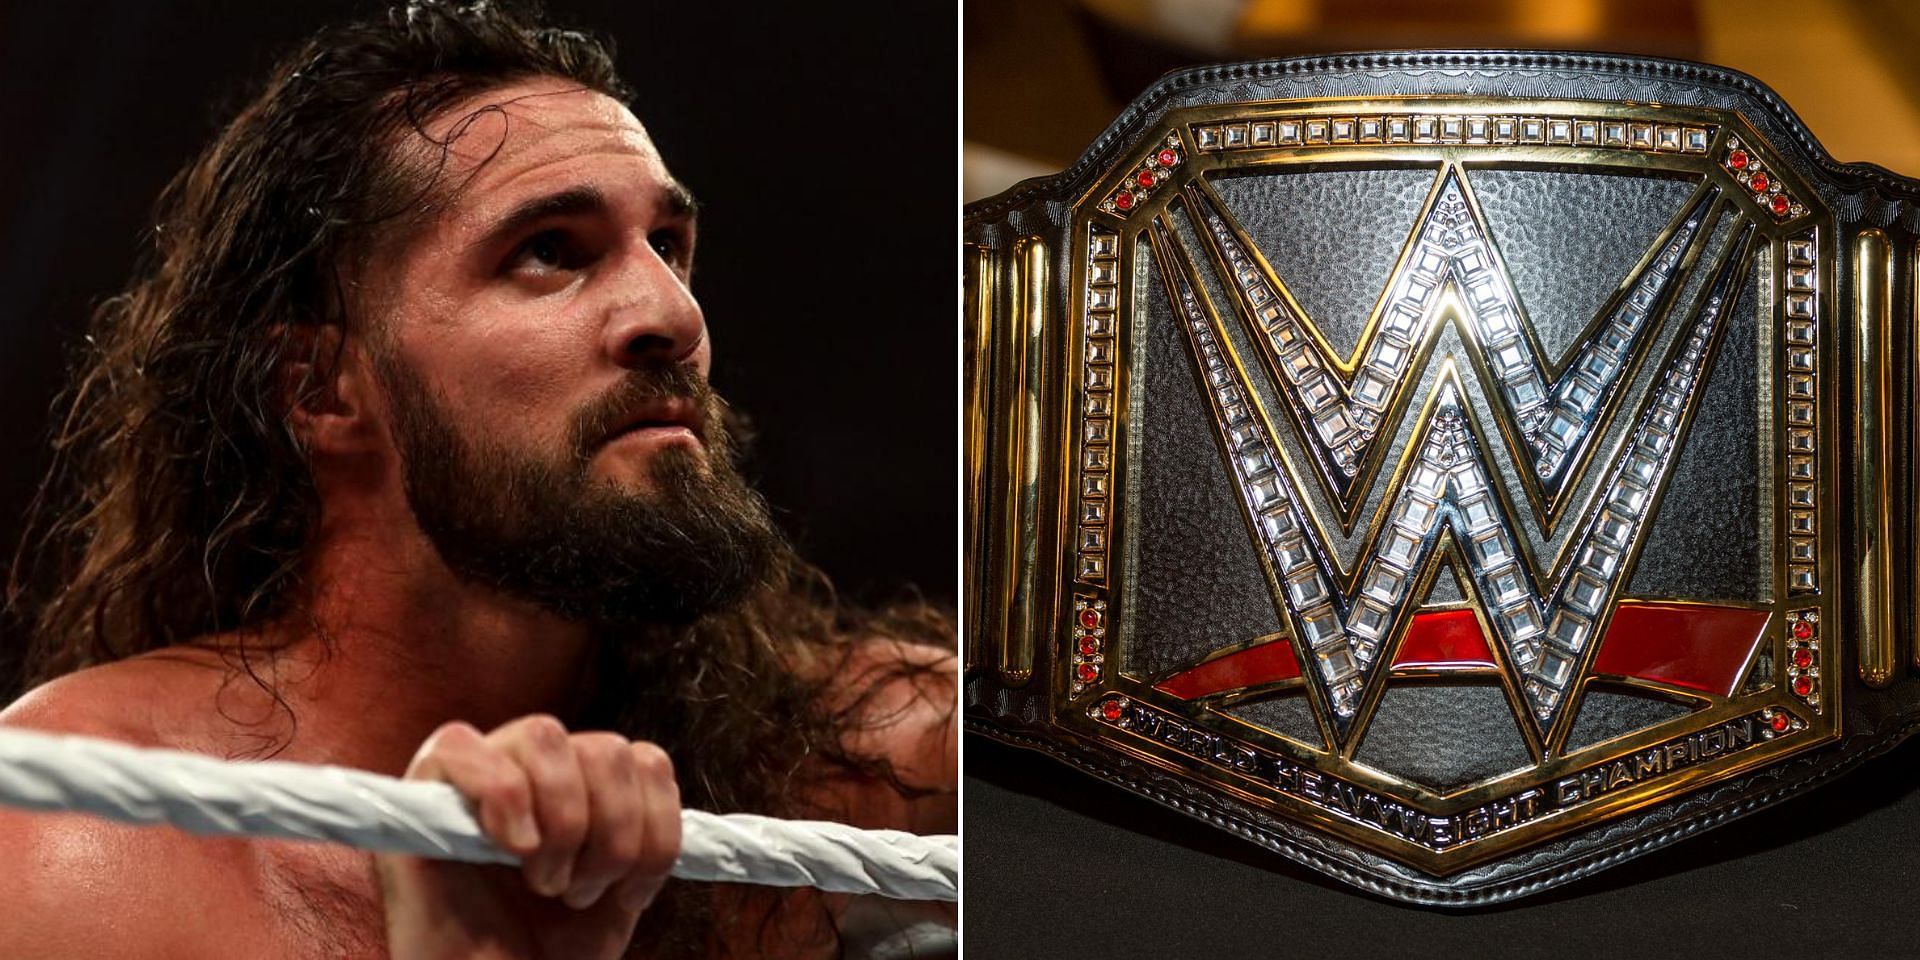 Seth Rollins is a two-time WWE Champion